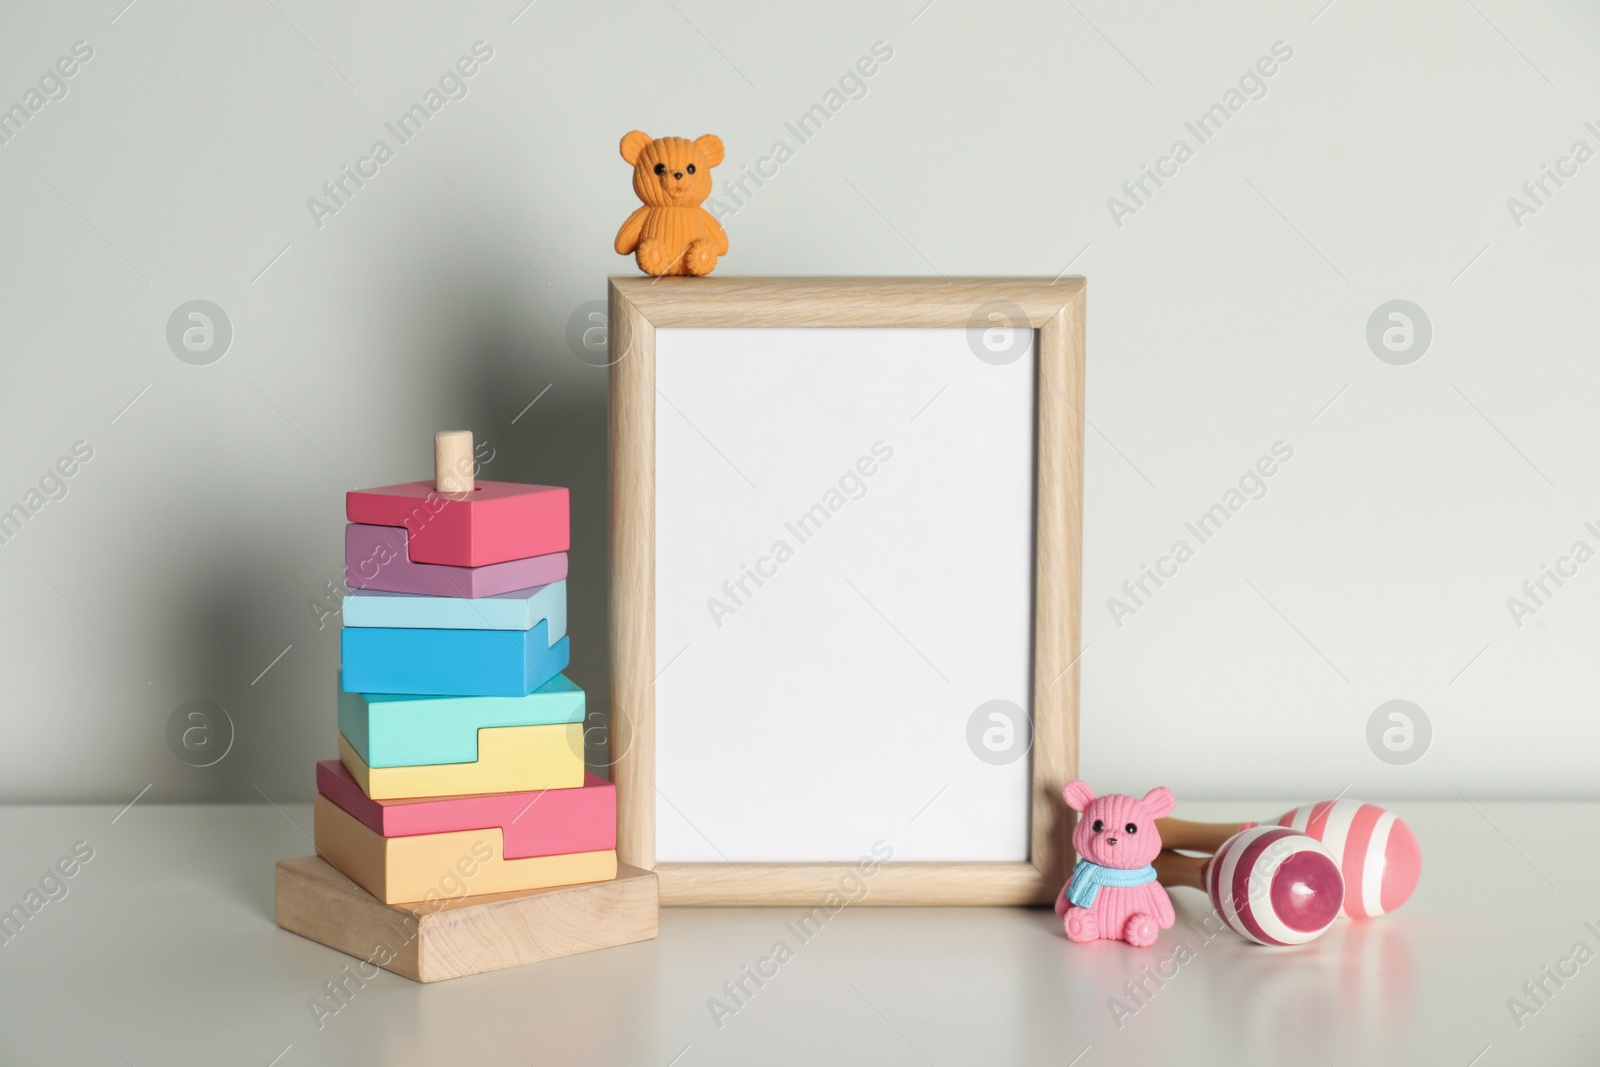 Photo of Composition with cute toys and frame on table against light background. Children's room interior elements